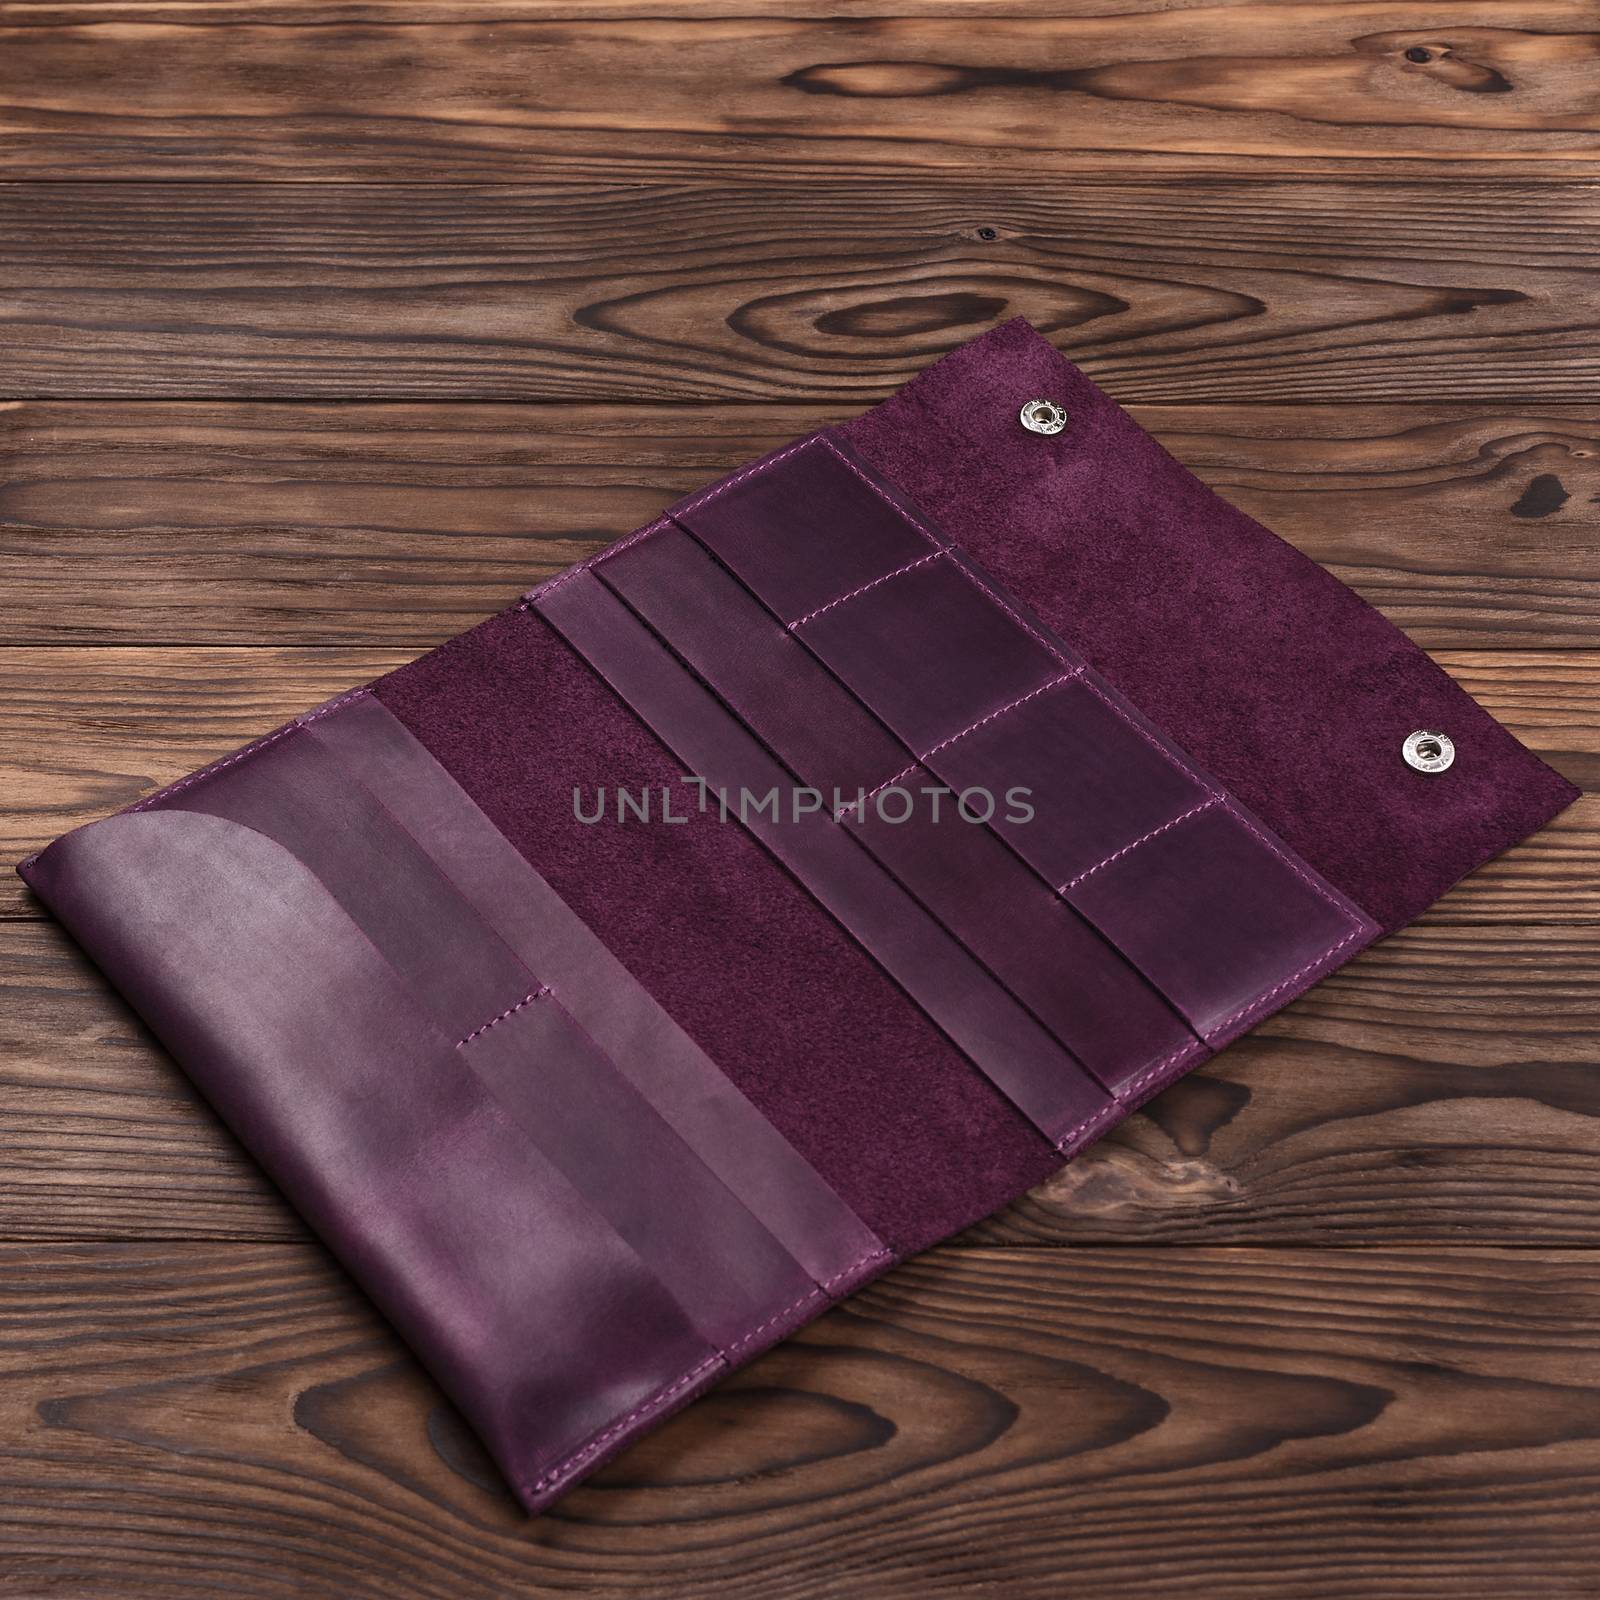 Handmade purple travel wallet lies on textured wooden backgroud closeup. Wallet is open and empty. Side view. Stock photo of businessman accessories. by alexsdriver